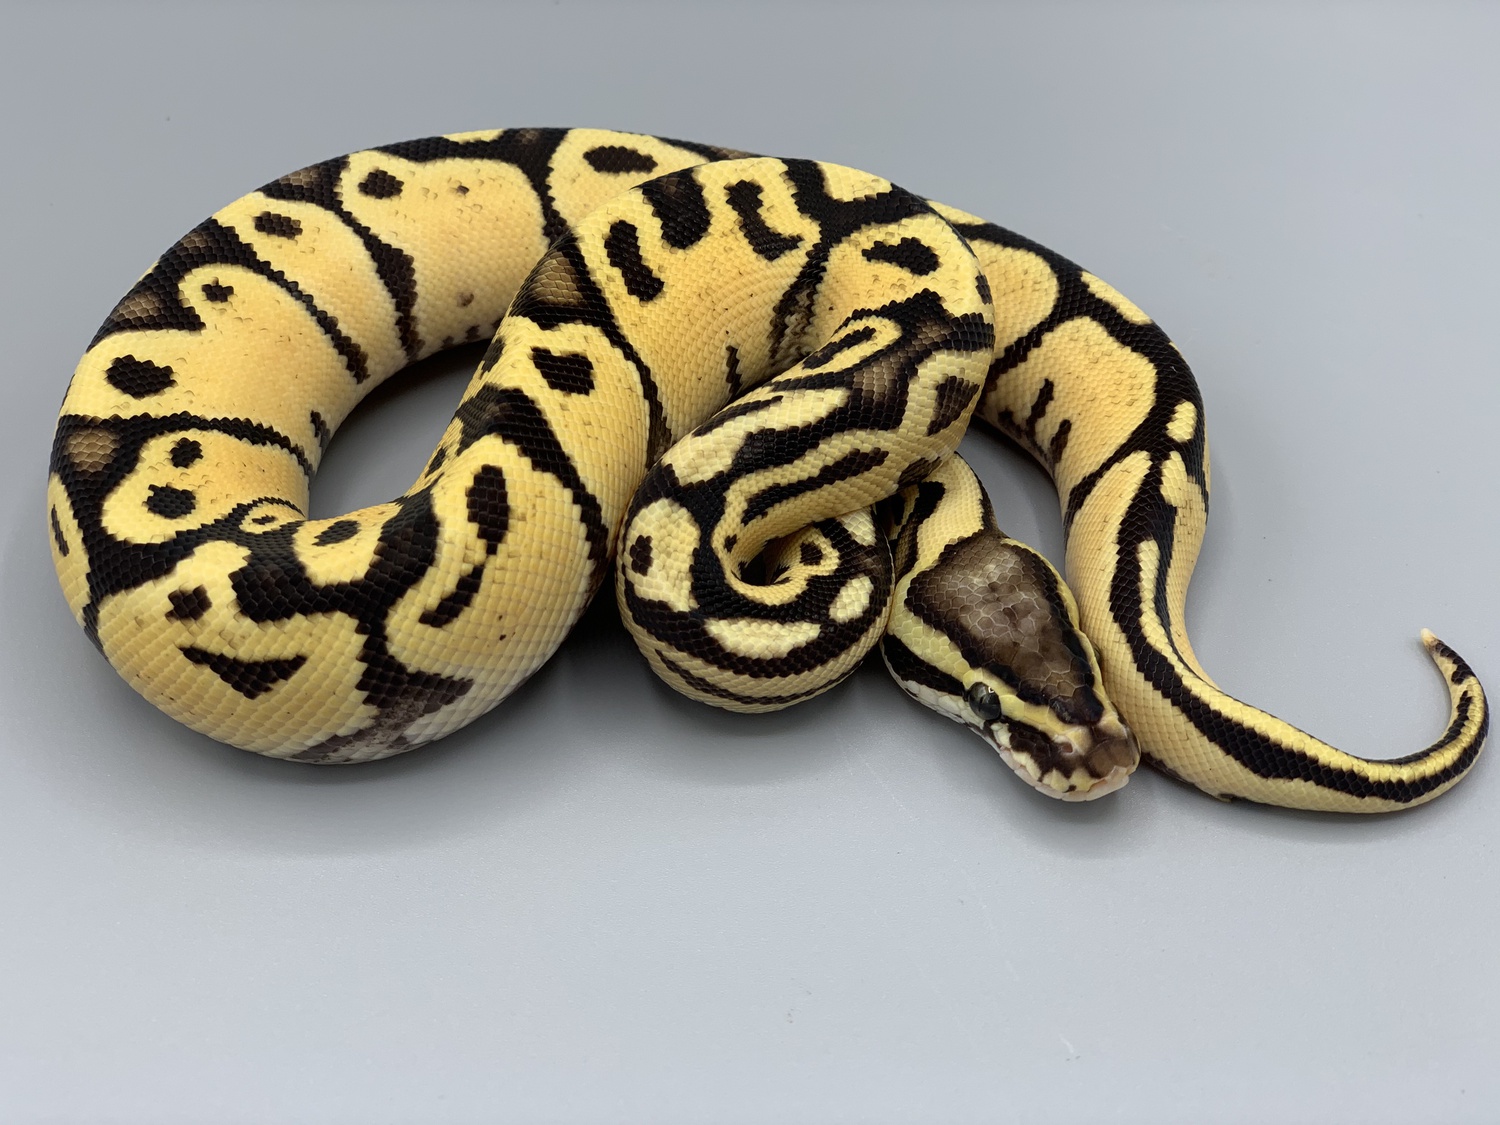 Firefly Mario Ball Python by CTH Reptiles